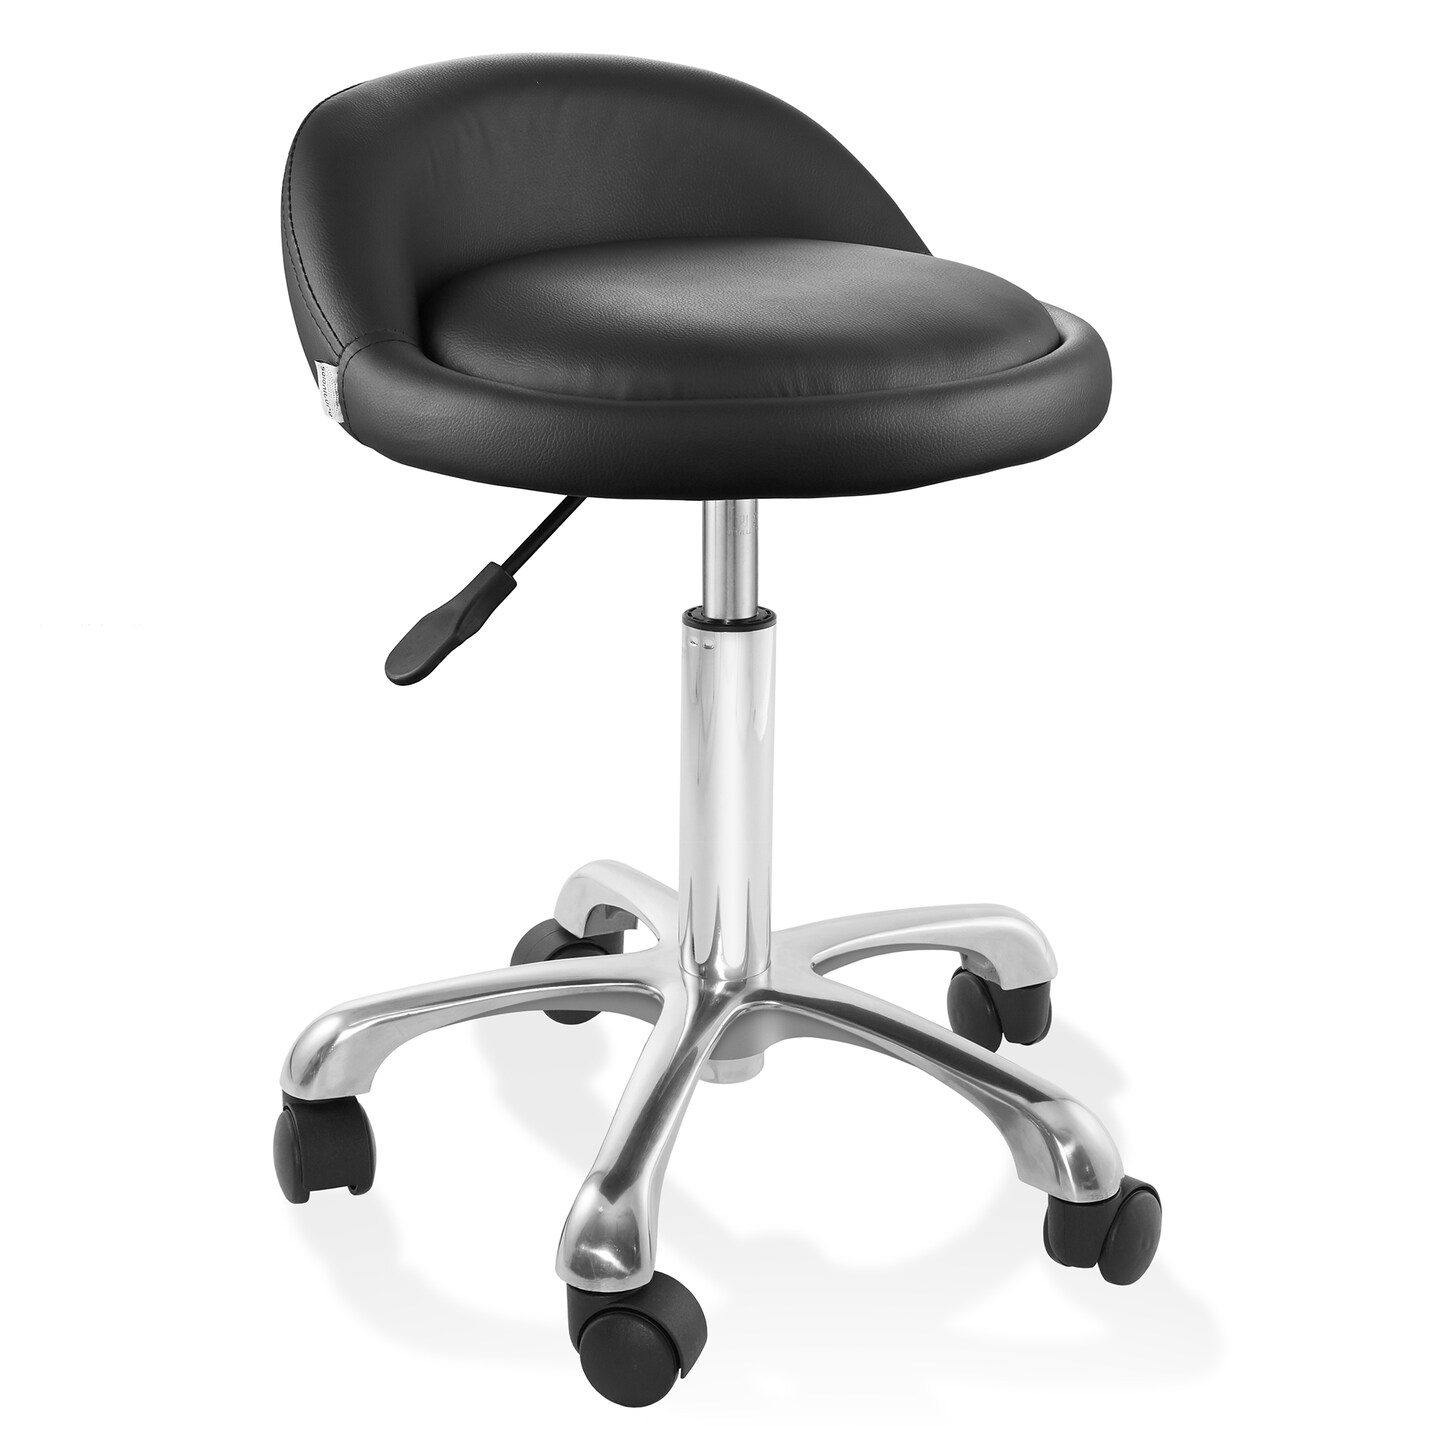 Saloniture Rolling Hydraulic Salon Stool with Low Backrest - Adjustable Swivel Chair for Spa, Shop, Salon, Massage, or Medical Office